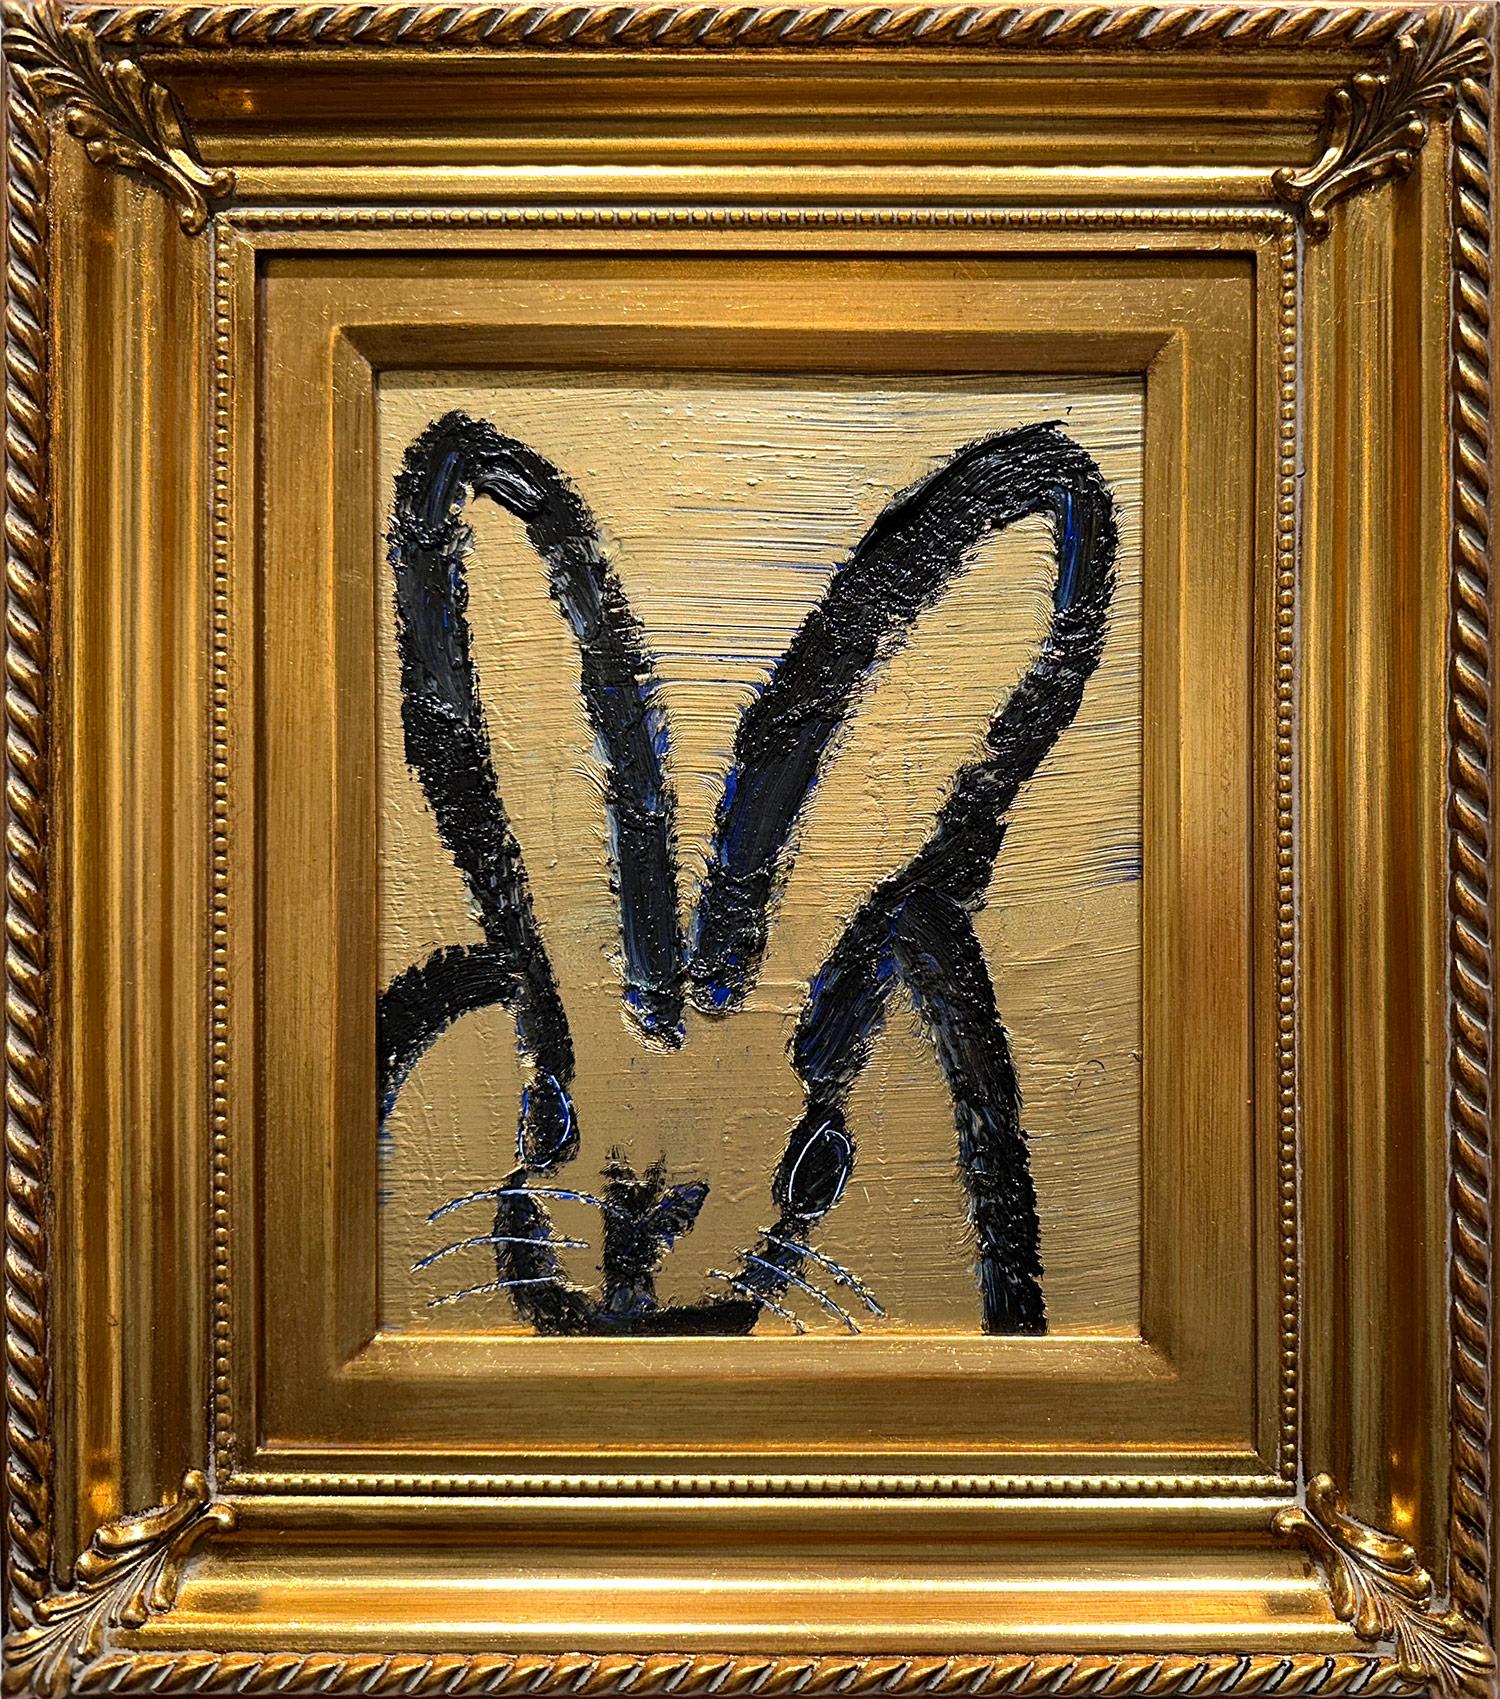 "Joy" Black Bunny on Golden Background with Cobalt Blue Accents